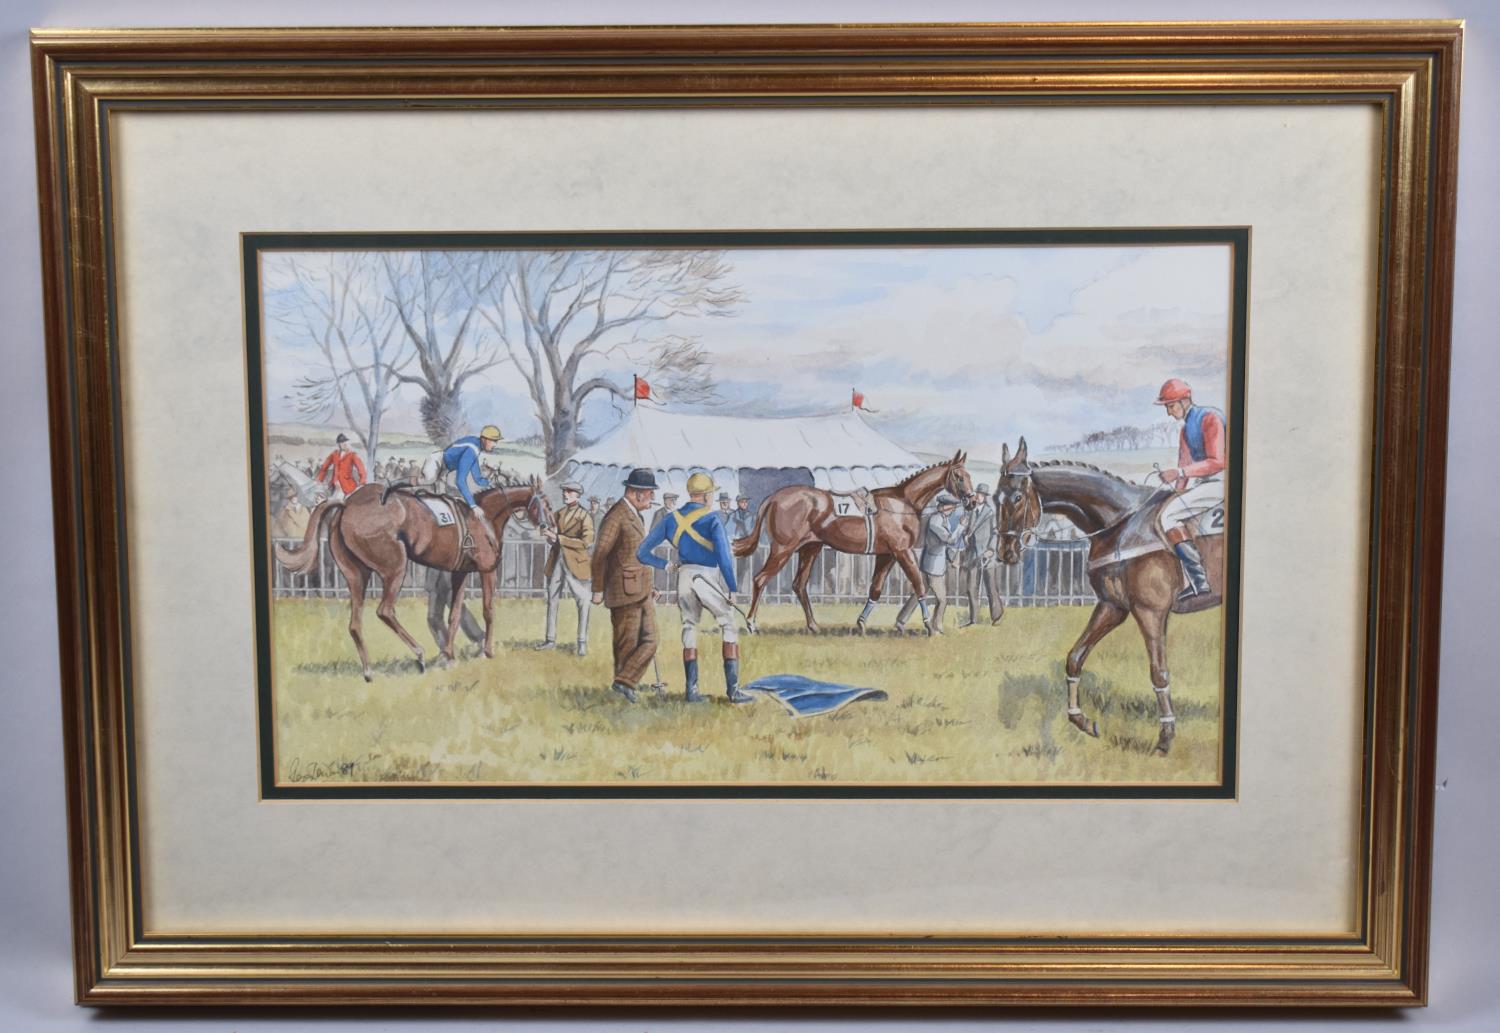 A Framed Watercolour being a Copy of "Oh to be in England" by Snaffles, 40x23cm